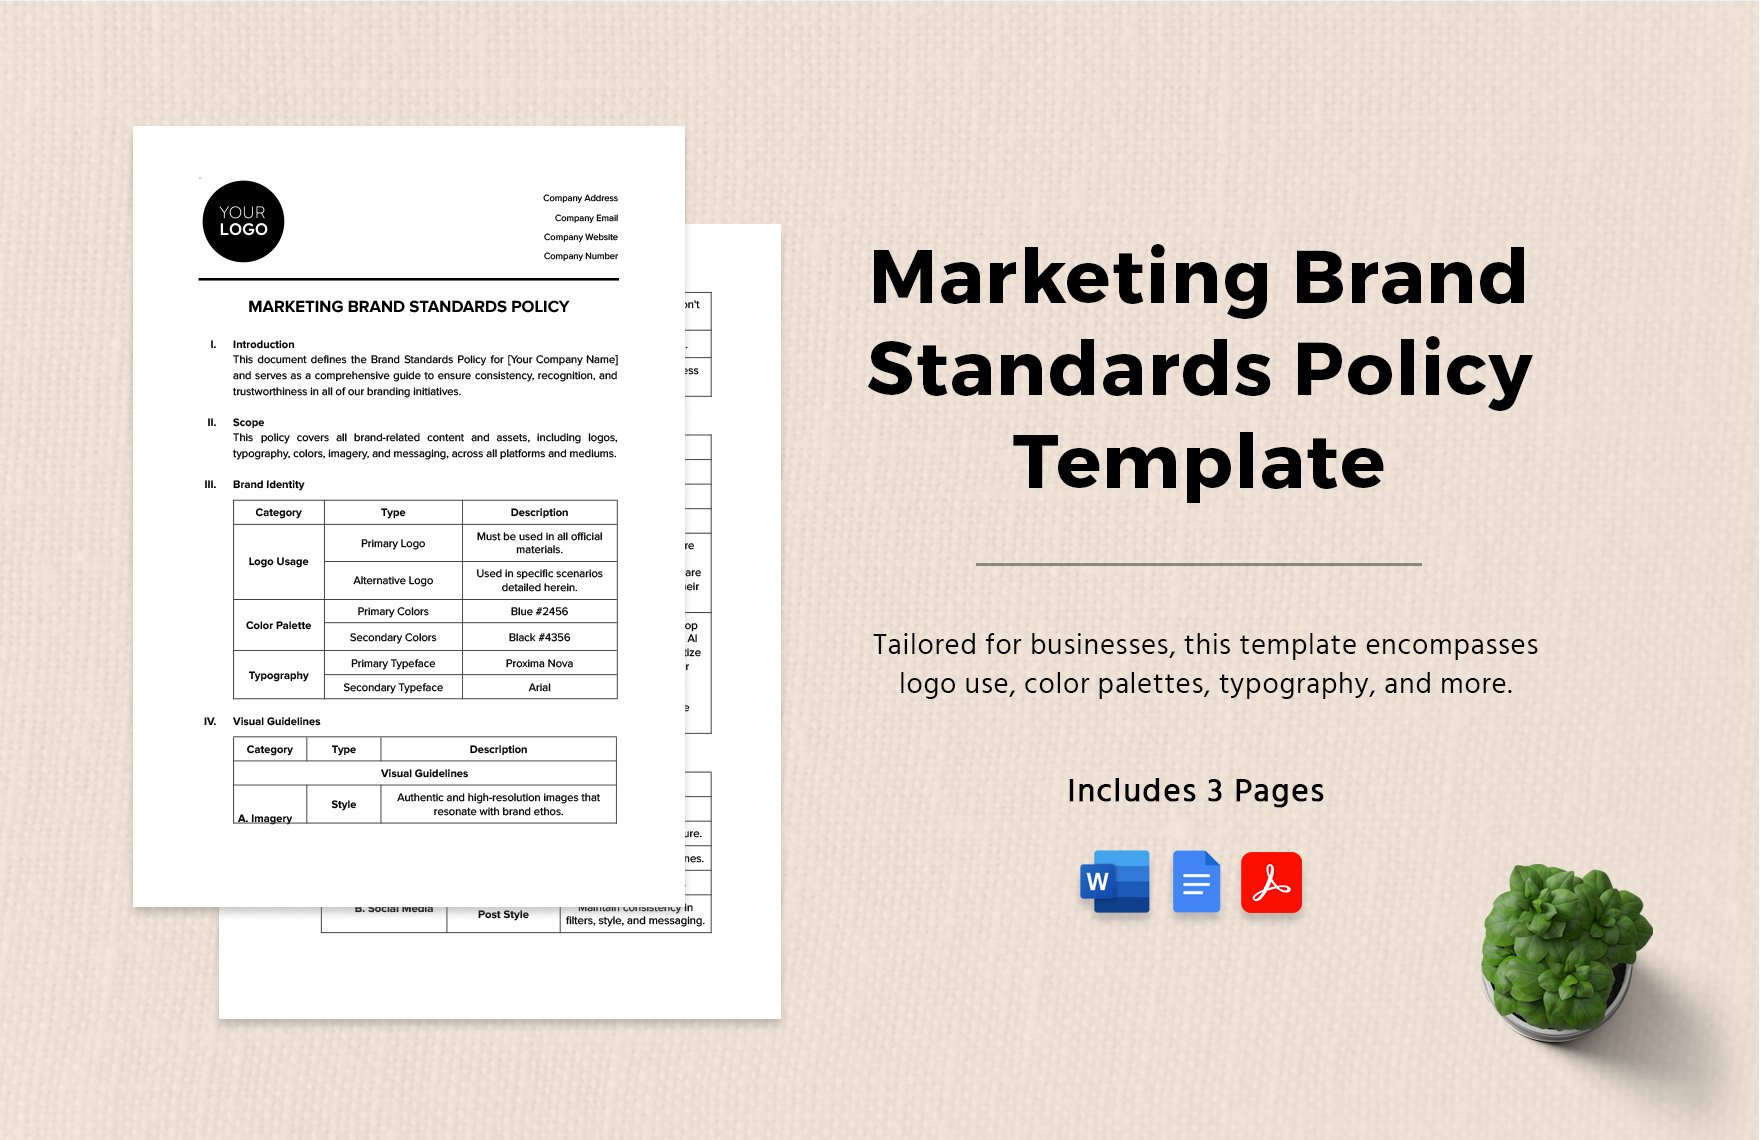 Marketing Brand Standards Policy Template